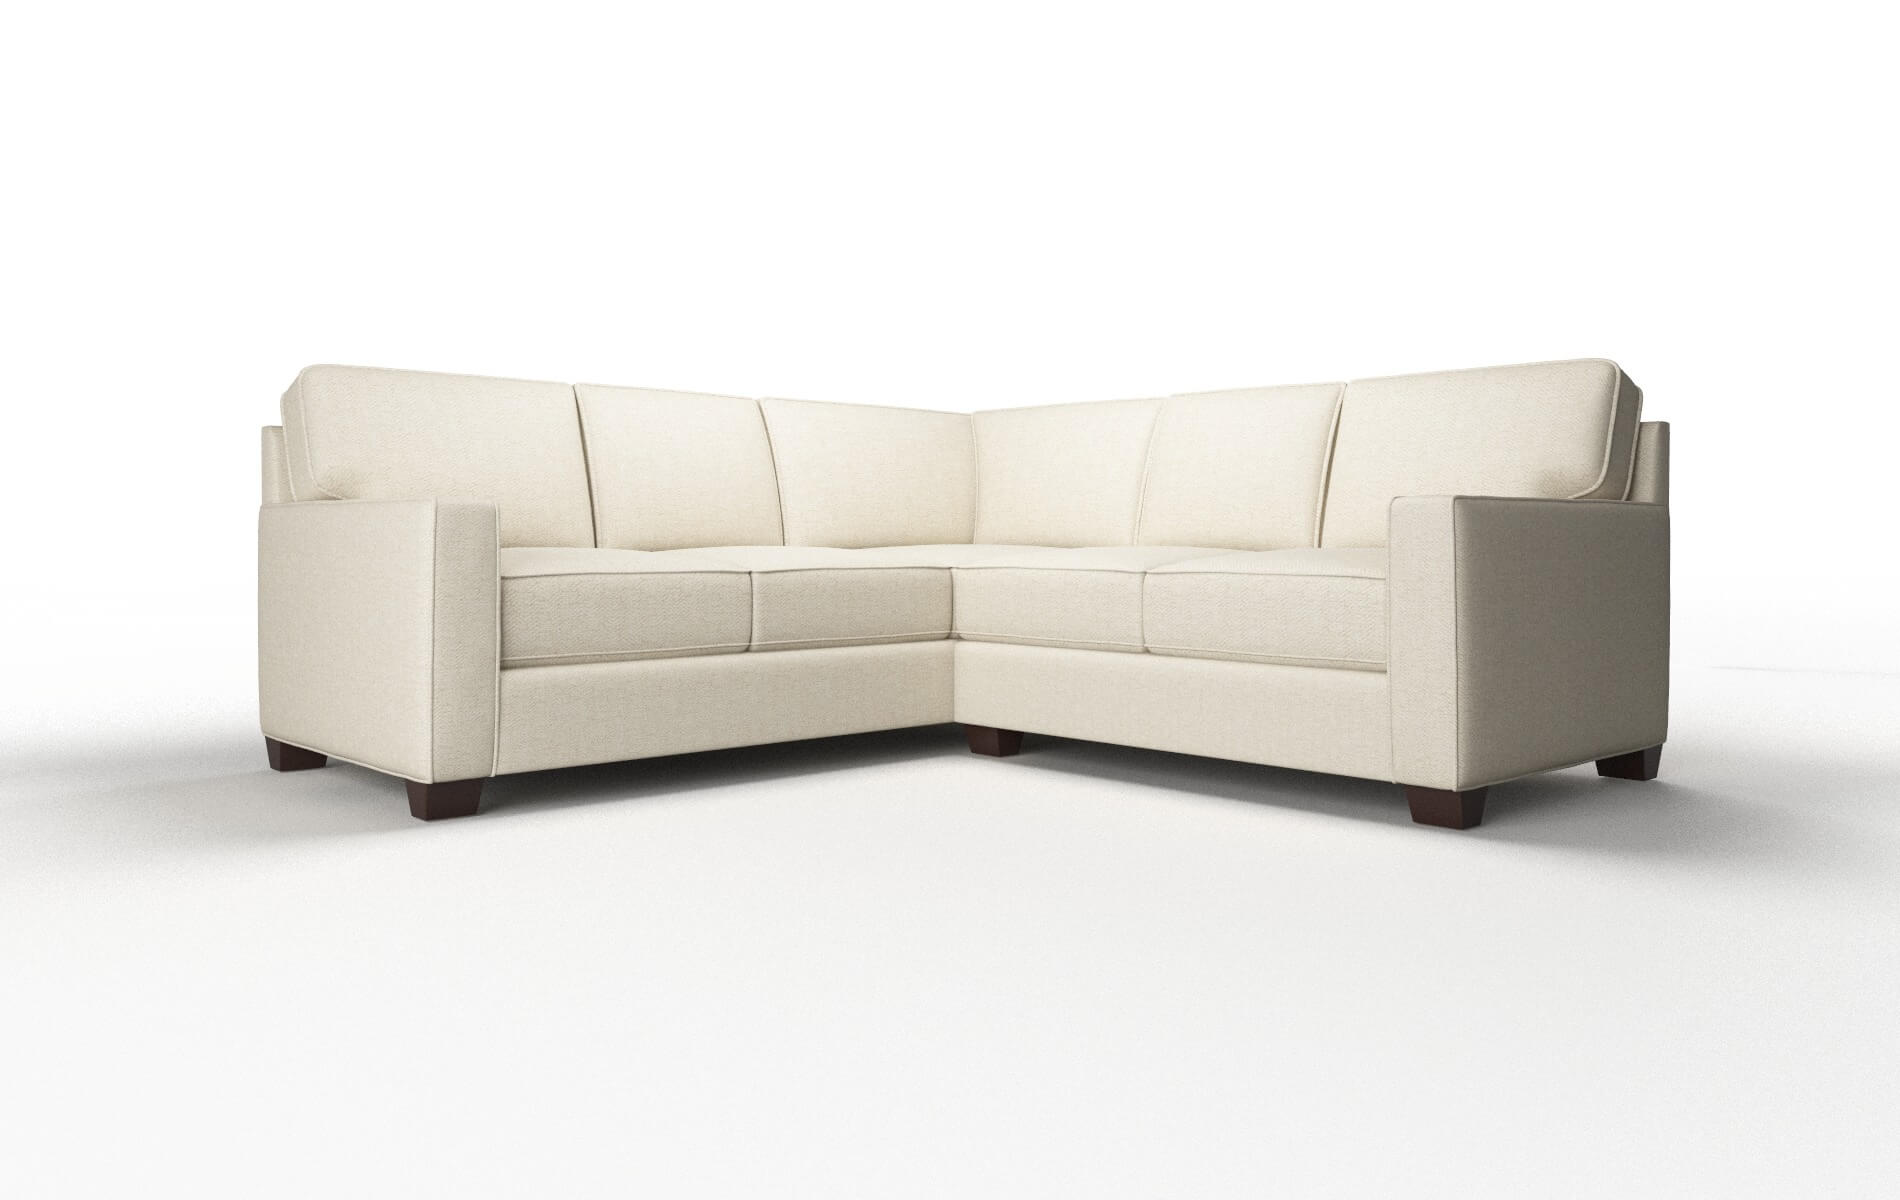 Chicago Catalina Wheat Sectional espresso legs 1